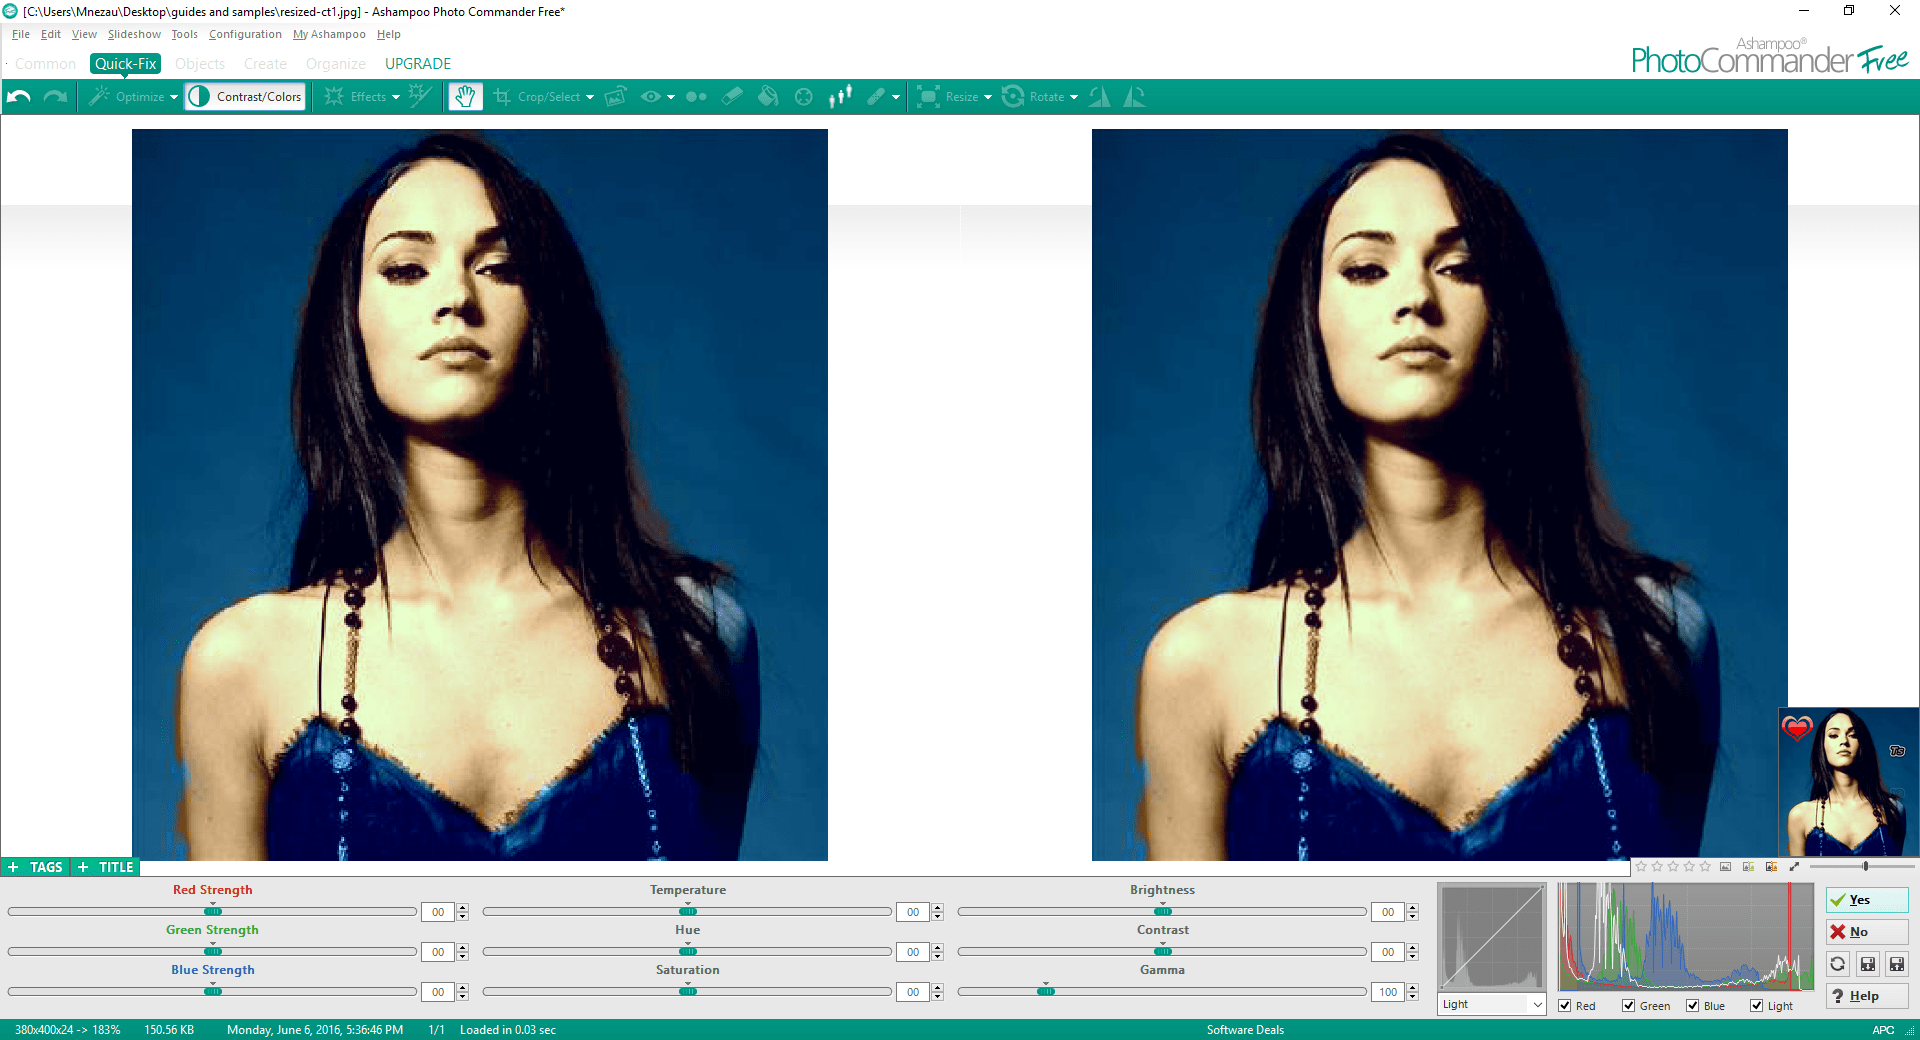 Changing Color Parameters